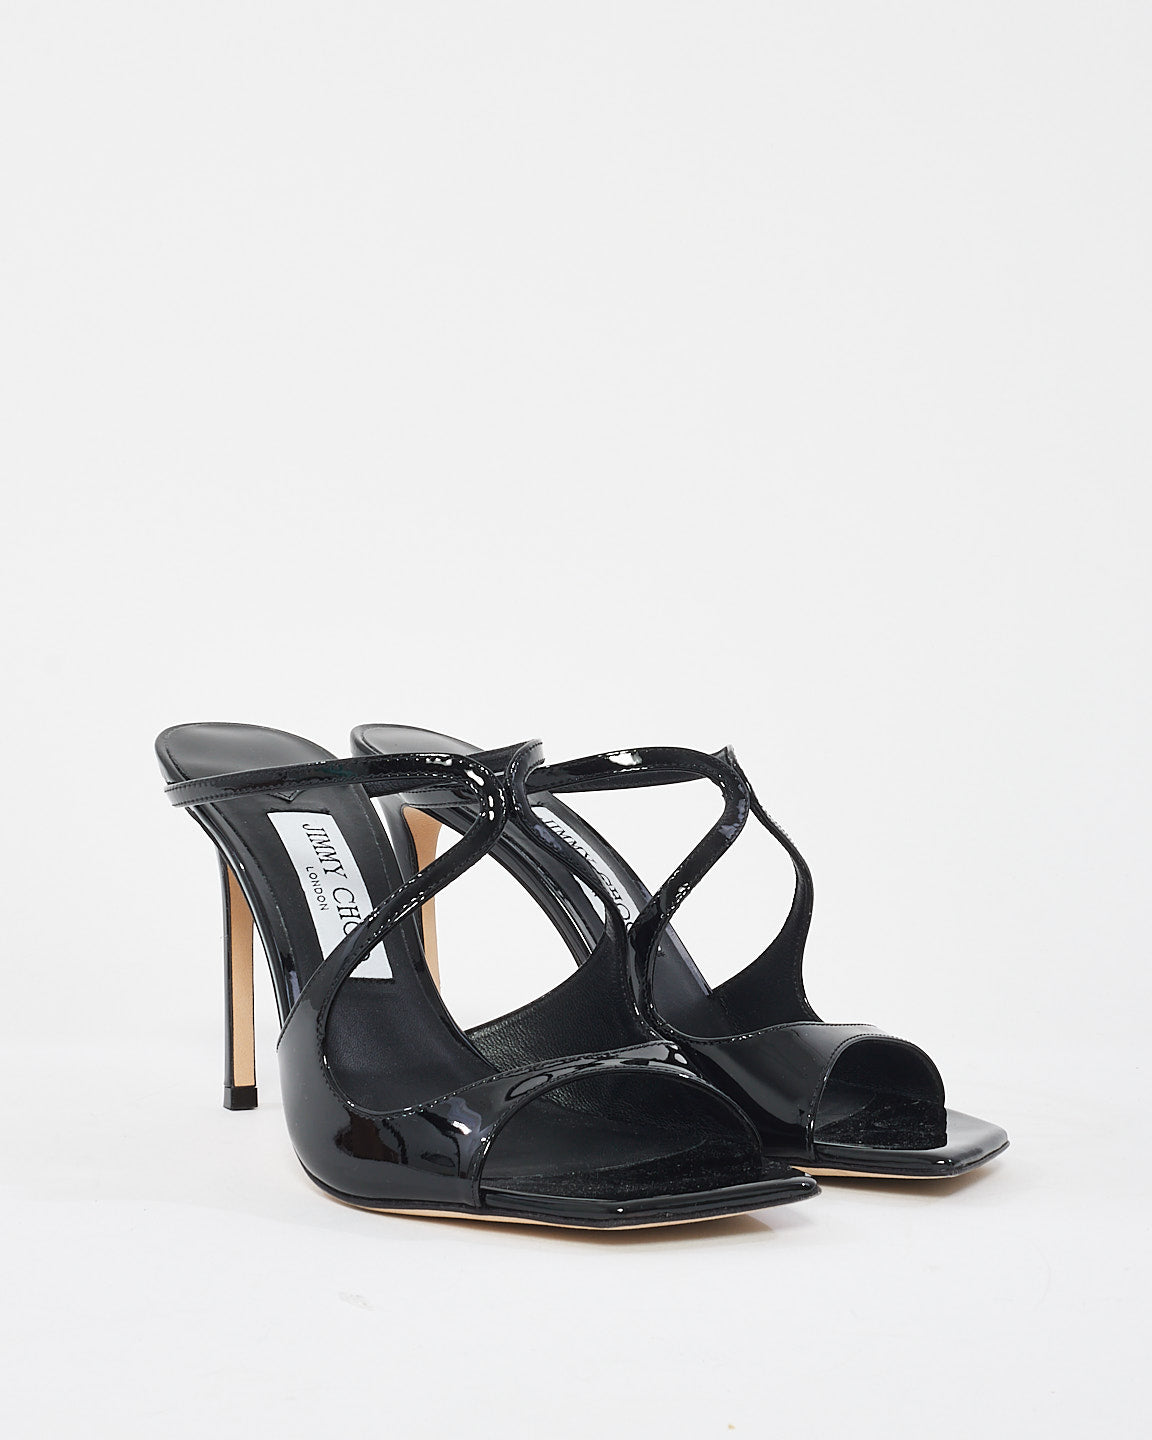 Jimmy Choo Black Patent Leather Anise Mules - 38.5